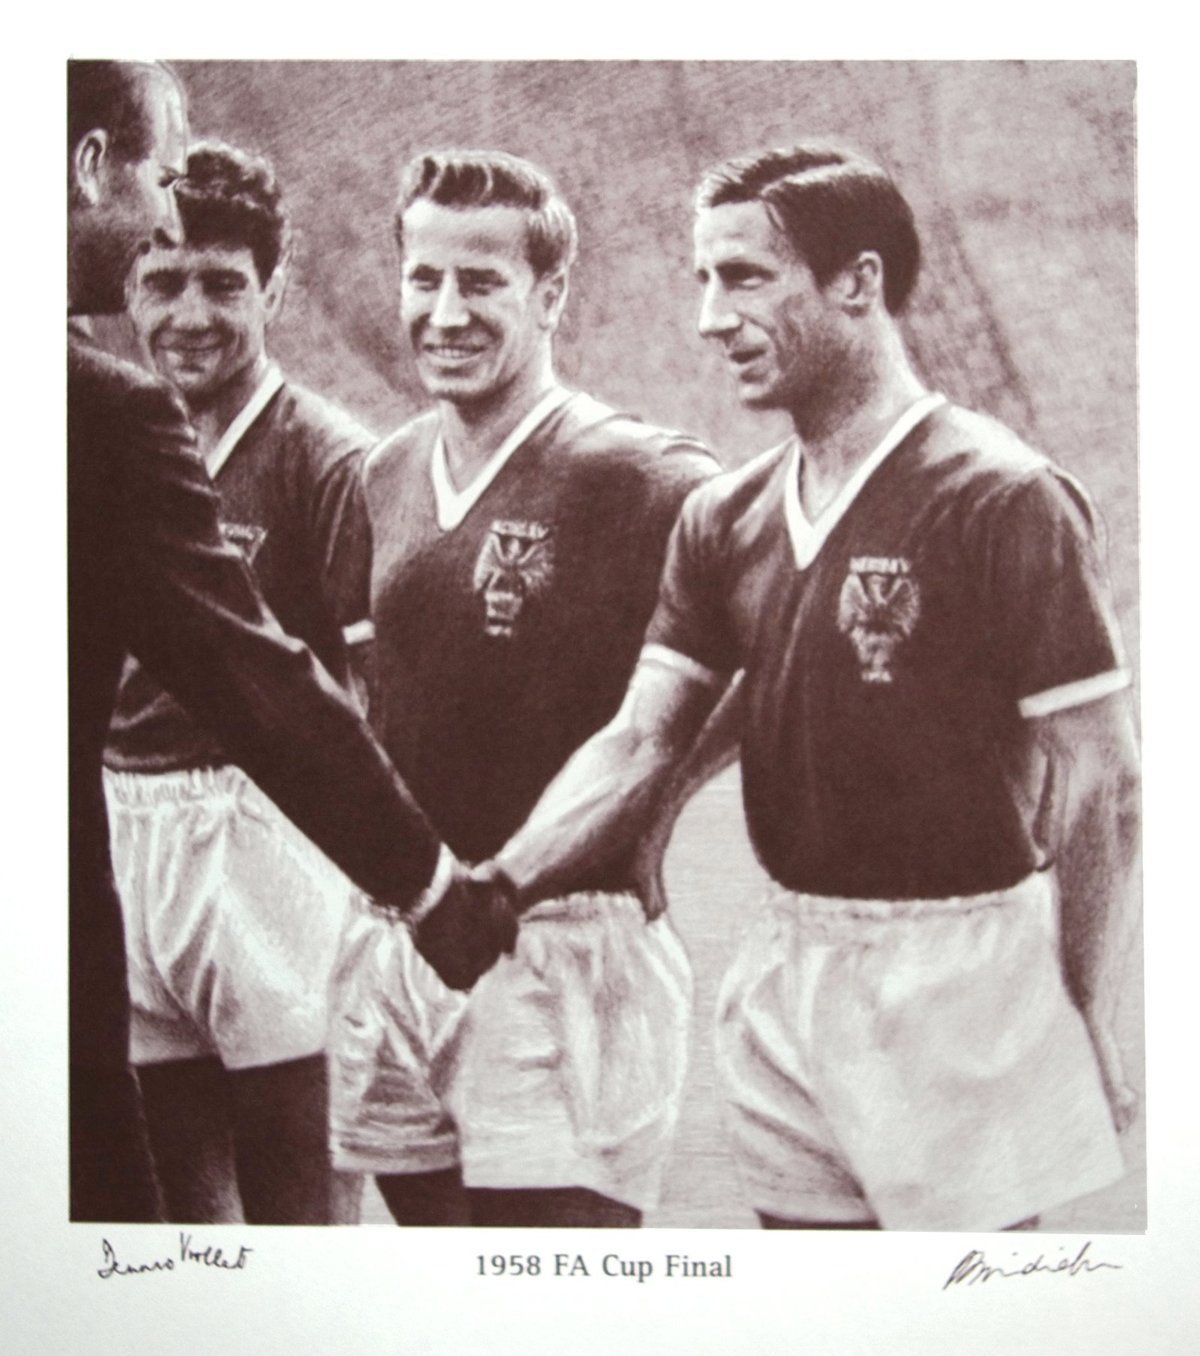 Image of The 1958 FA Cup Final.